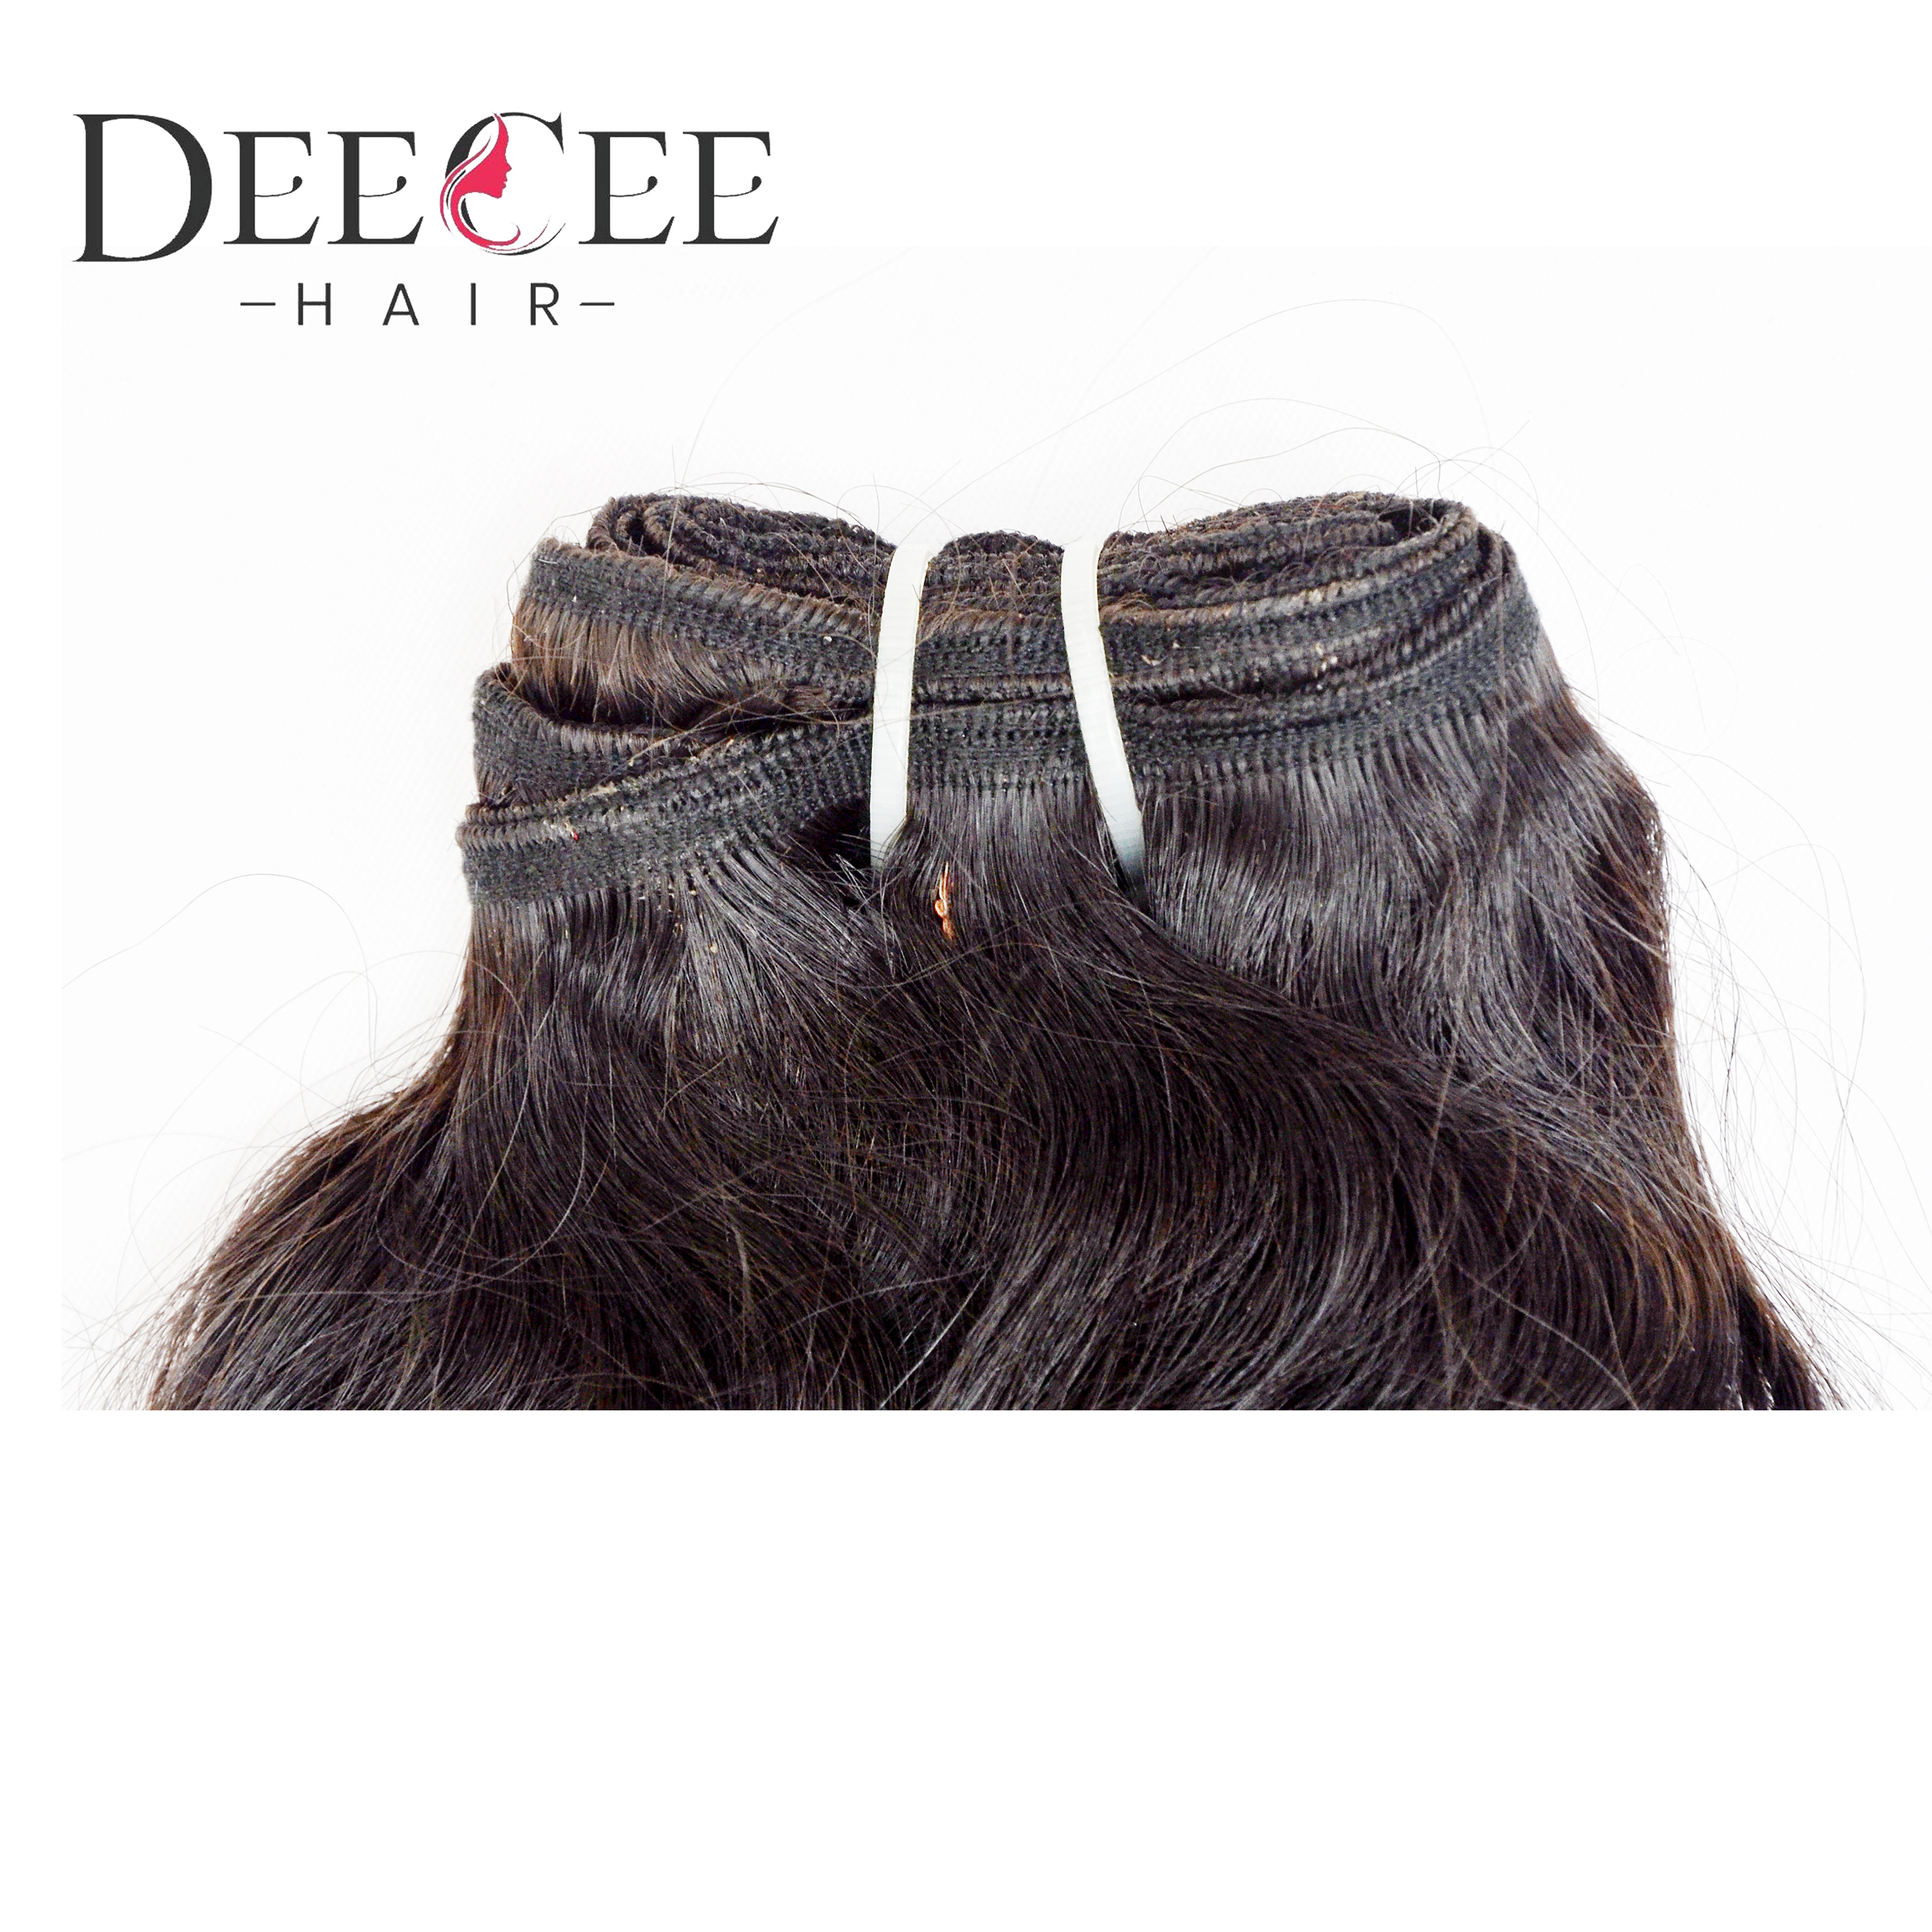 Double Drawn Indian Human Hair Curly Hairs